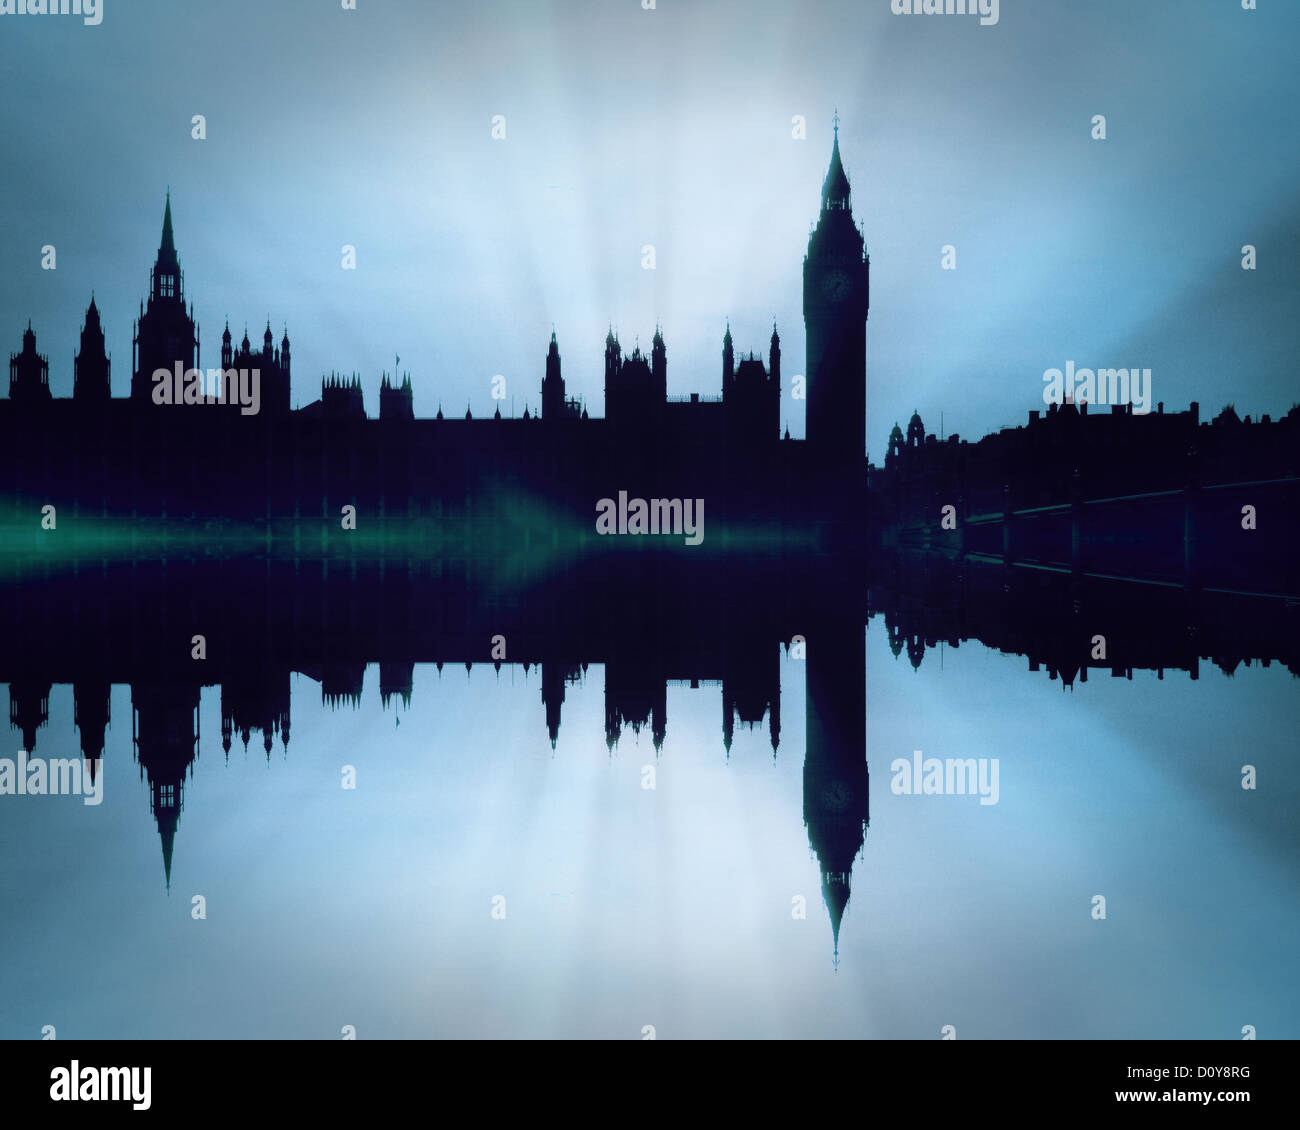 GB - LONDON: Westminster Graphic Design Stock Photo